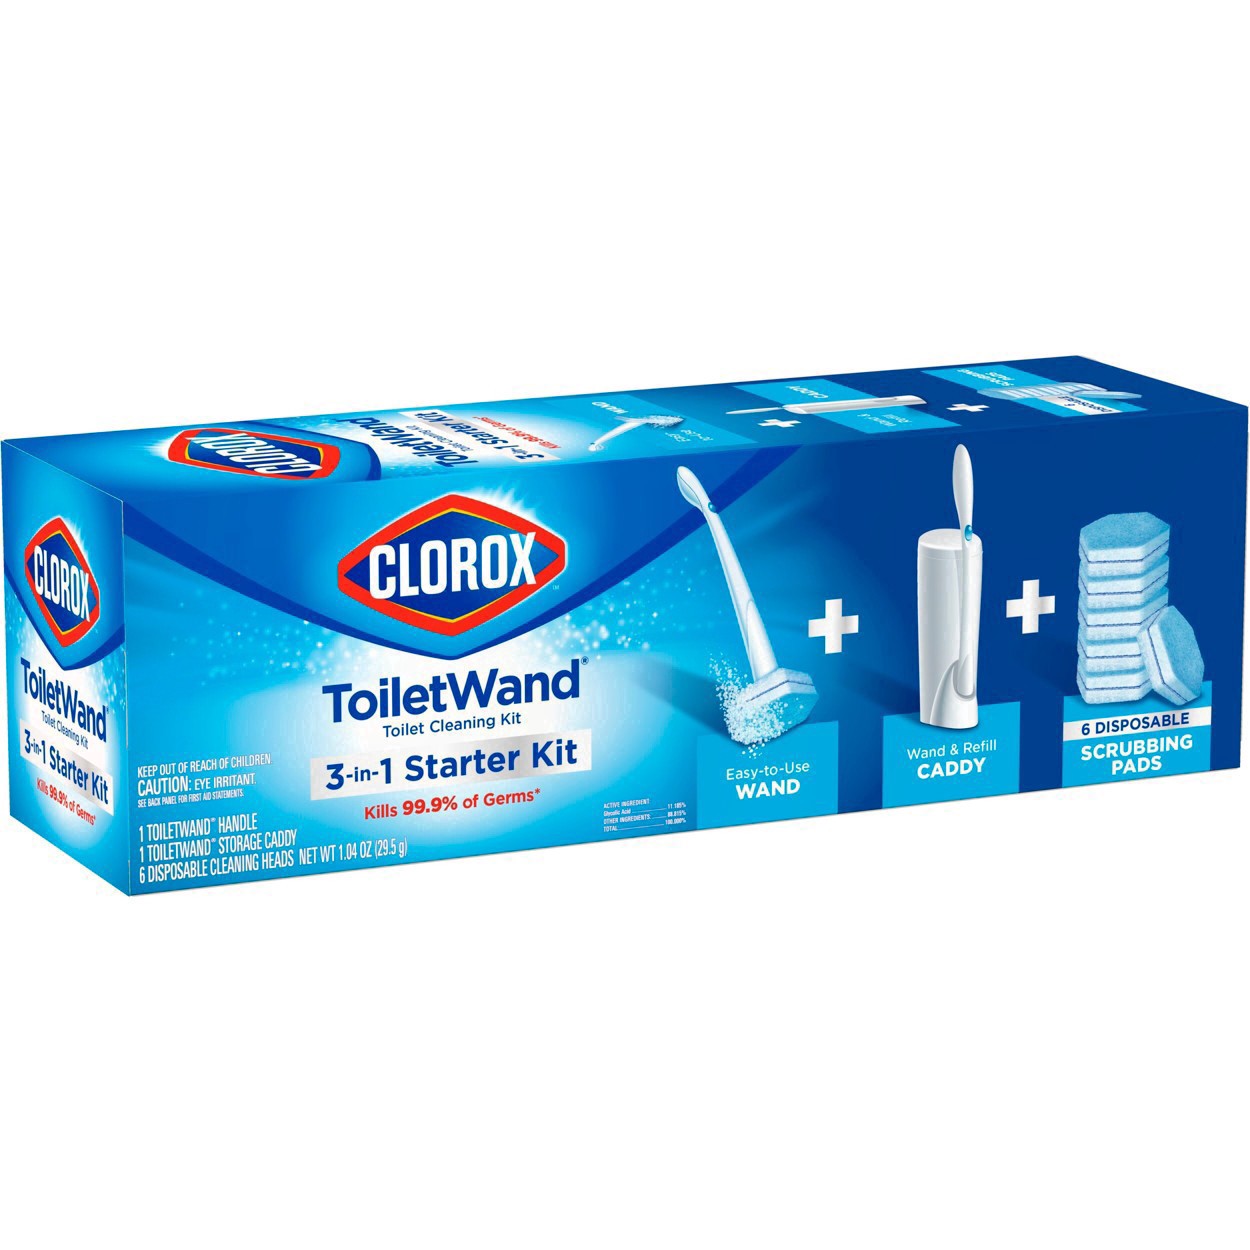 slide 67 of 176, Clorox Toilet Wand 3-in-1 Starter Toliet Cleaning Kit, 1 ct